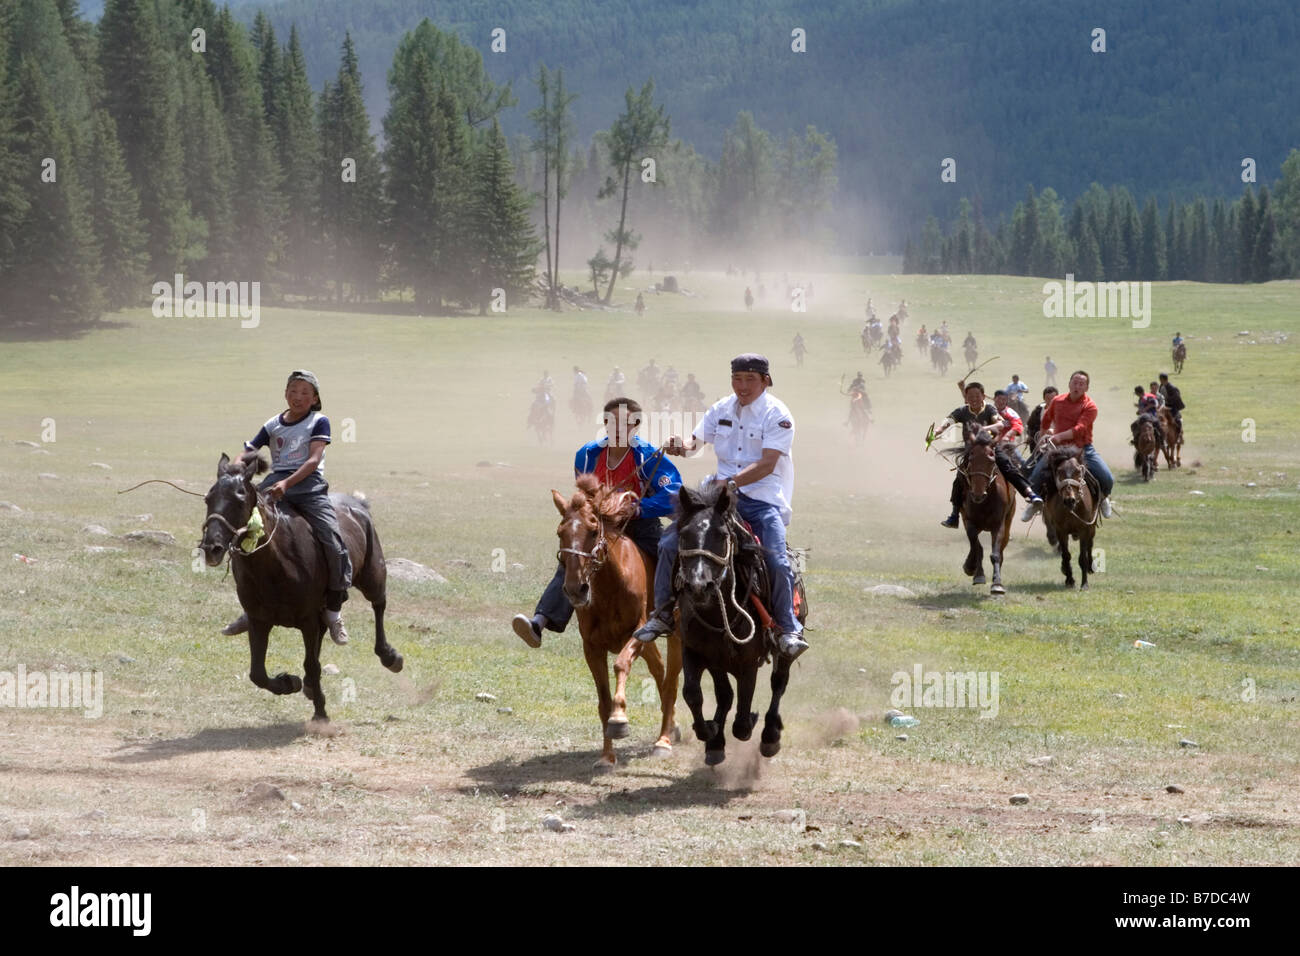 Horse racing during the Mongolian annual competition called Ao Bao Jie. Stock Photo